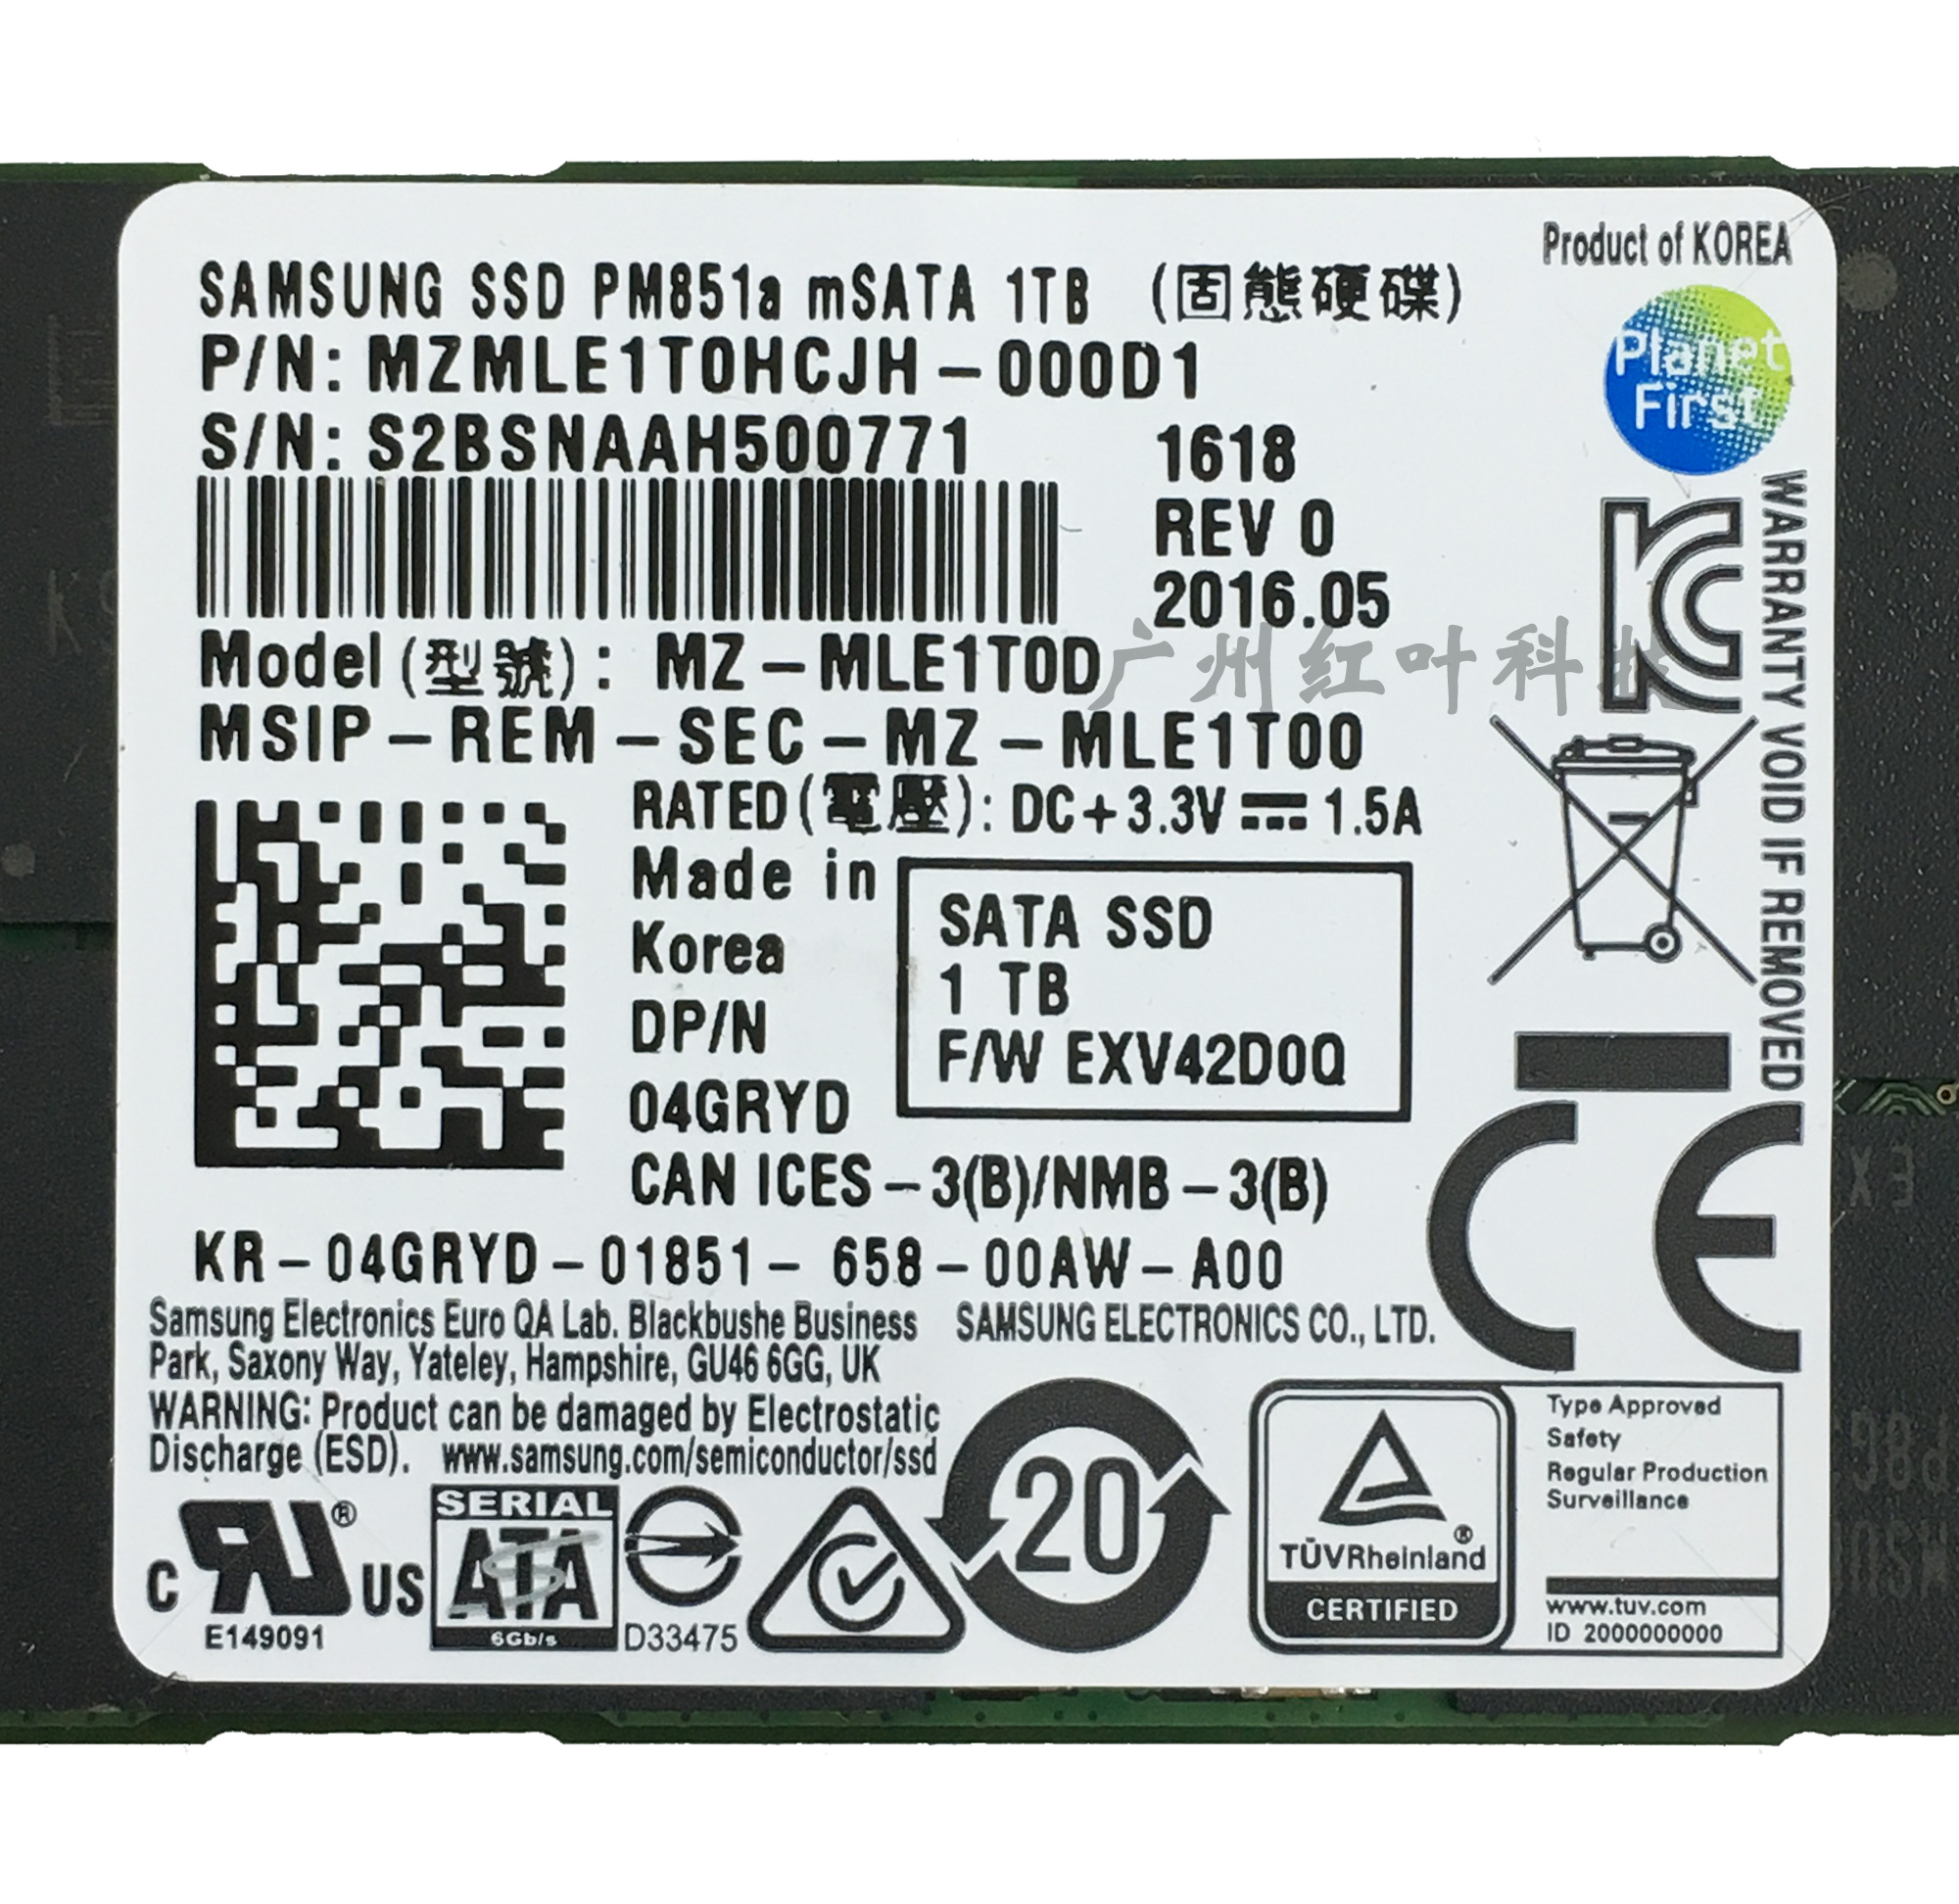 Hate Lost On foot 735.68] Samsung PM851a 1TB mSATA3 notebook mini SSD solid state hard drive  can be installed with a 2.5 inch from best taobao agent ,taobao  international,international ecommerce newbecca.com